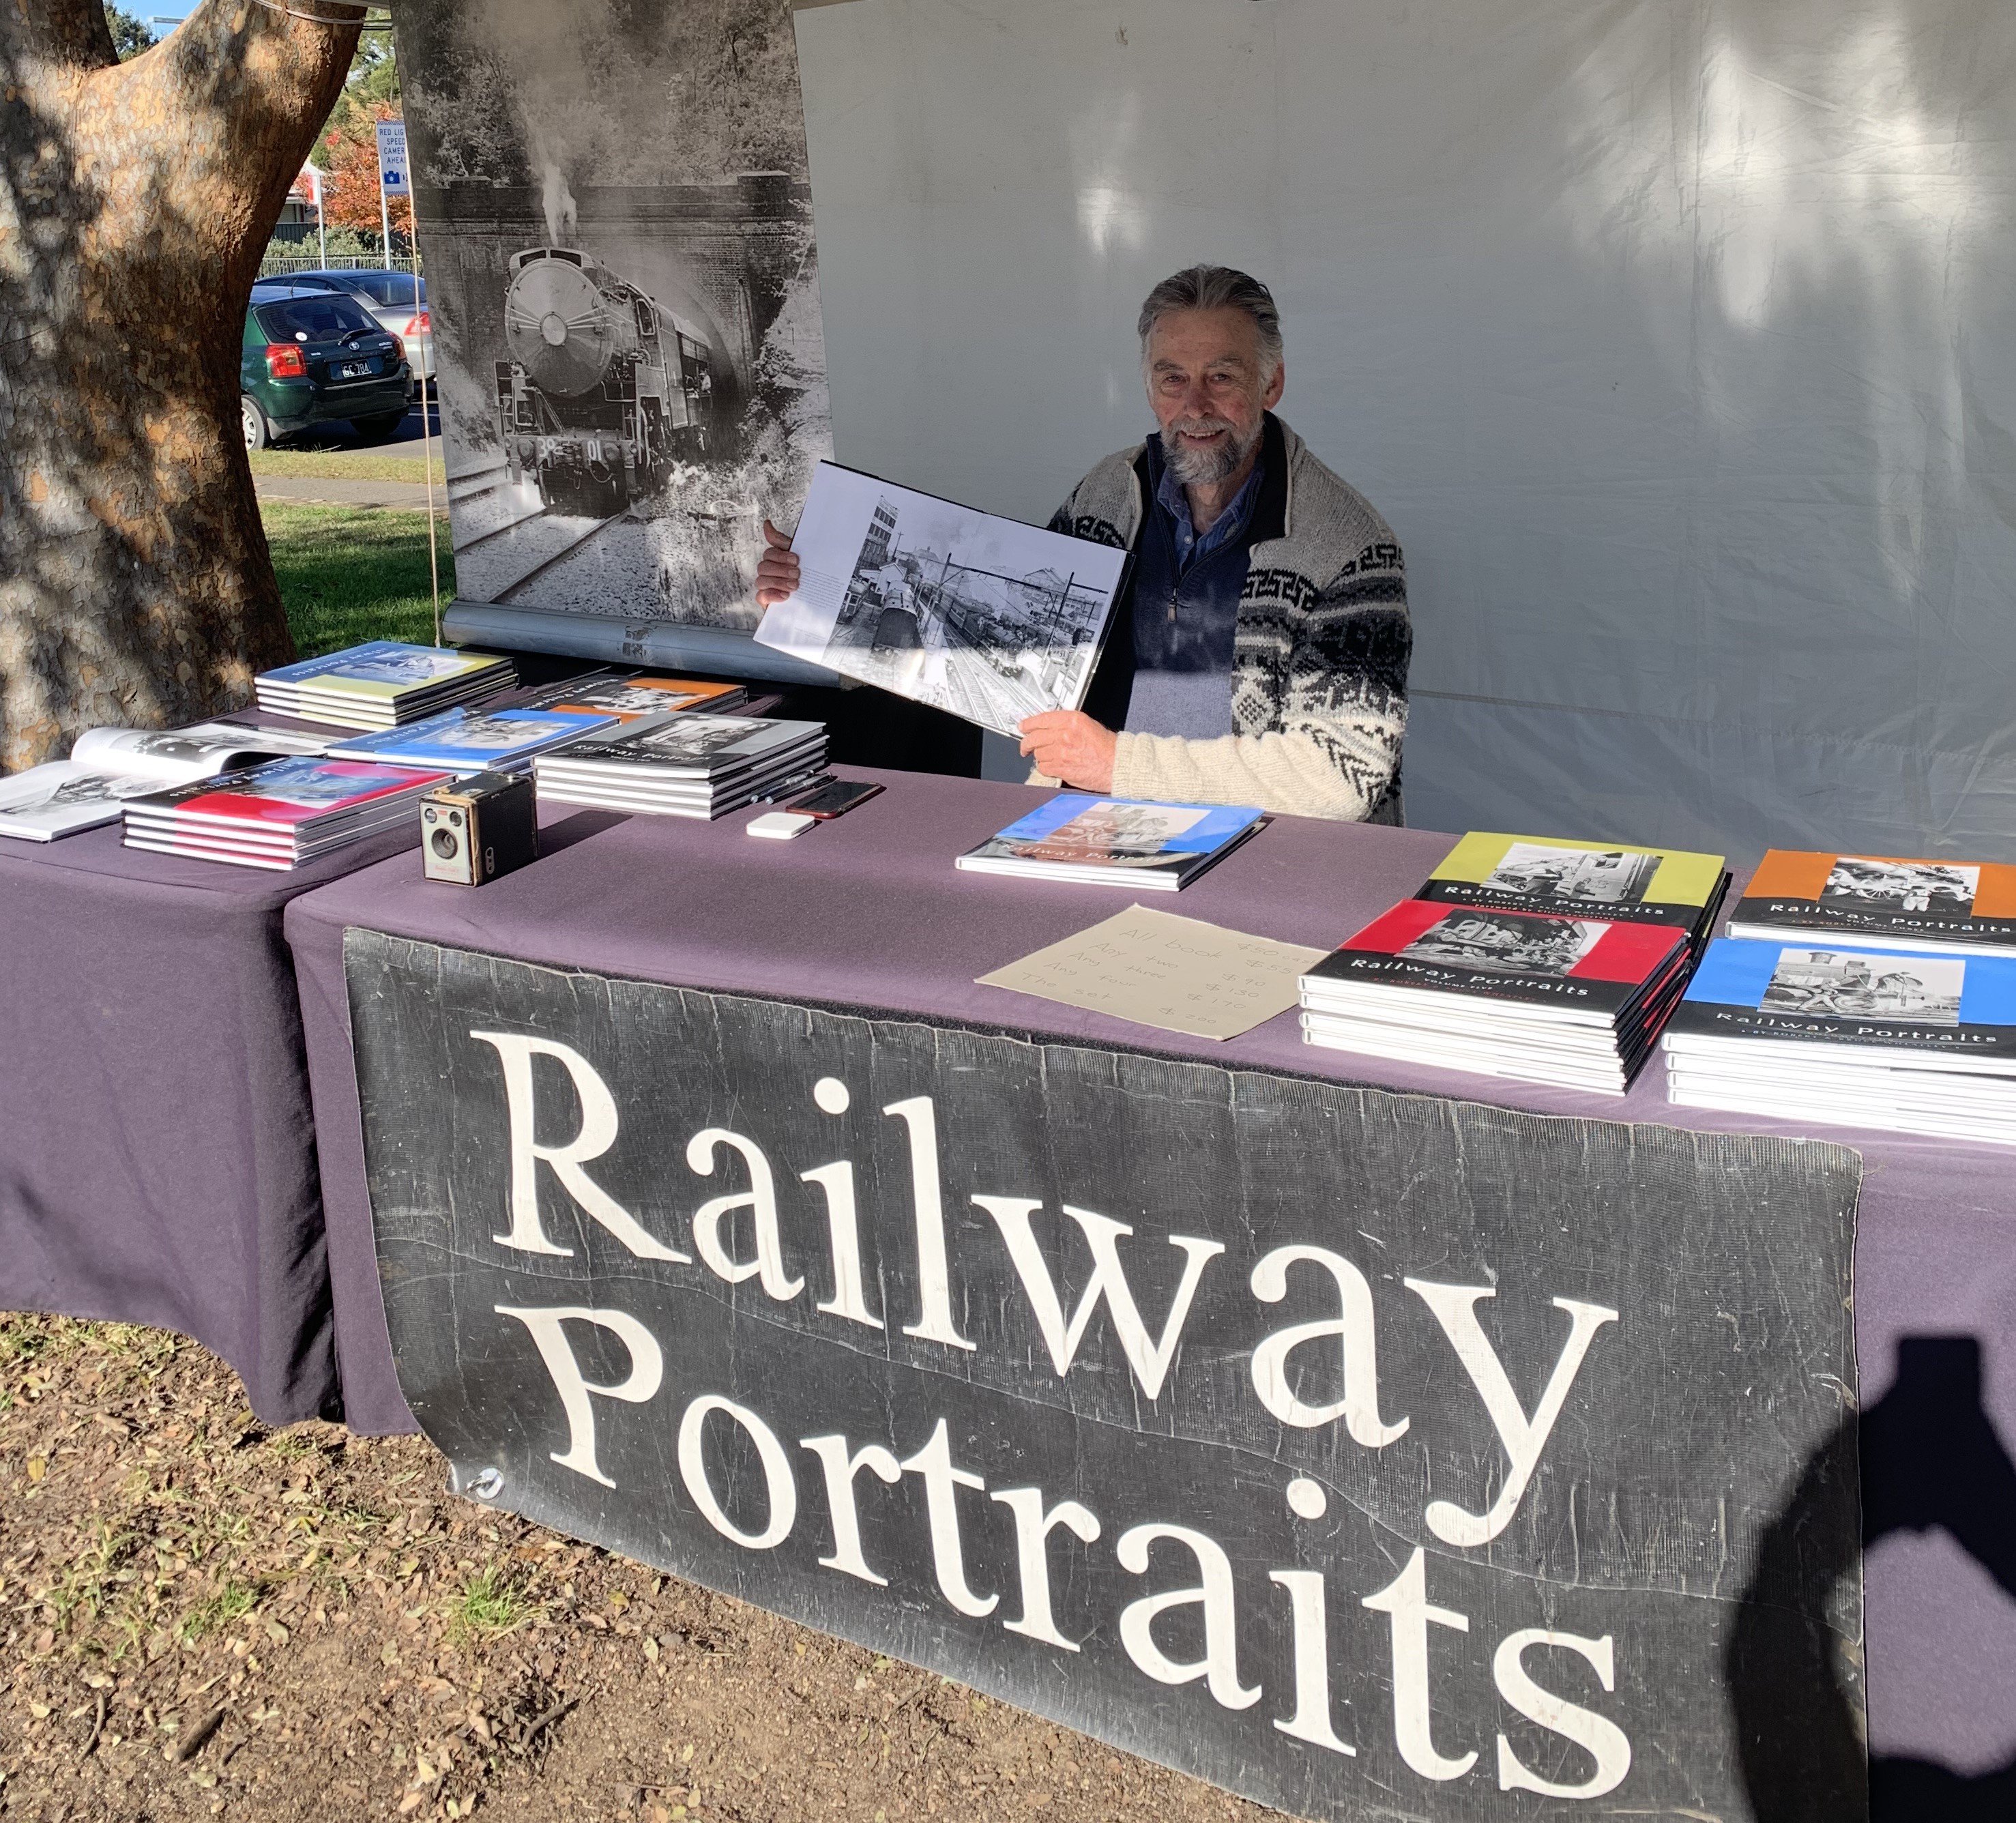 a photo of a man behind a market stall holding a photographic book. the front of the stall reads railways portraits, and atop the stall are several piles of coloured books with images of trains in black and white. behind the man sits a rectangular banner with a larger black and white image of a locomotive